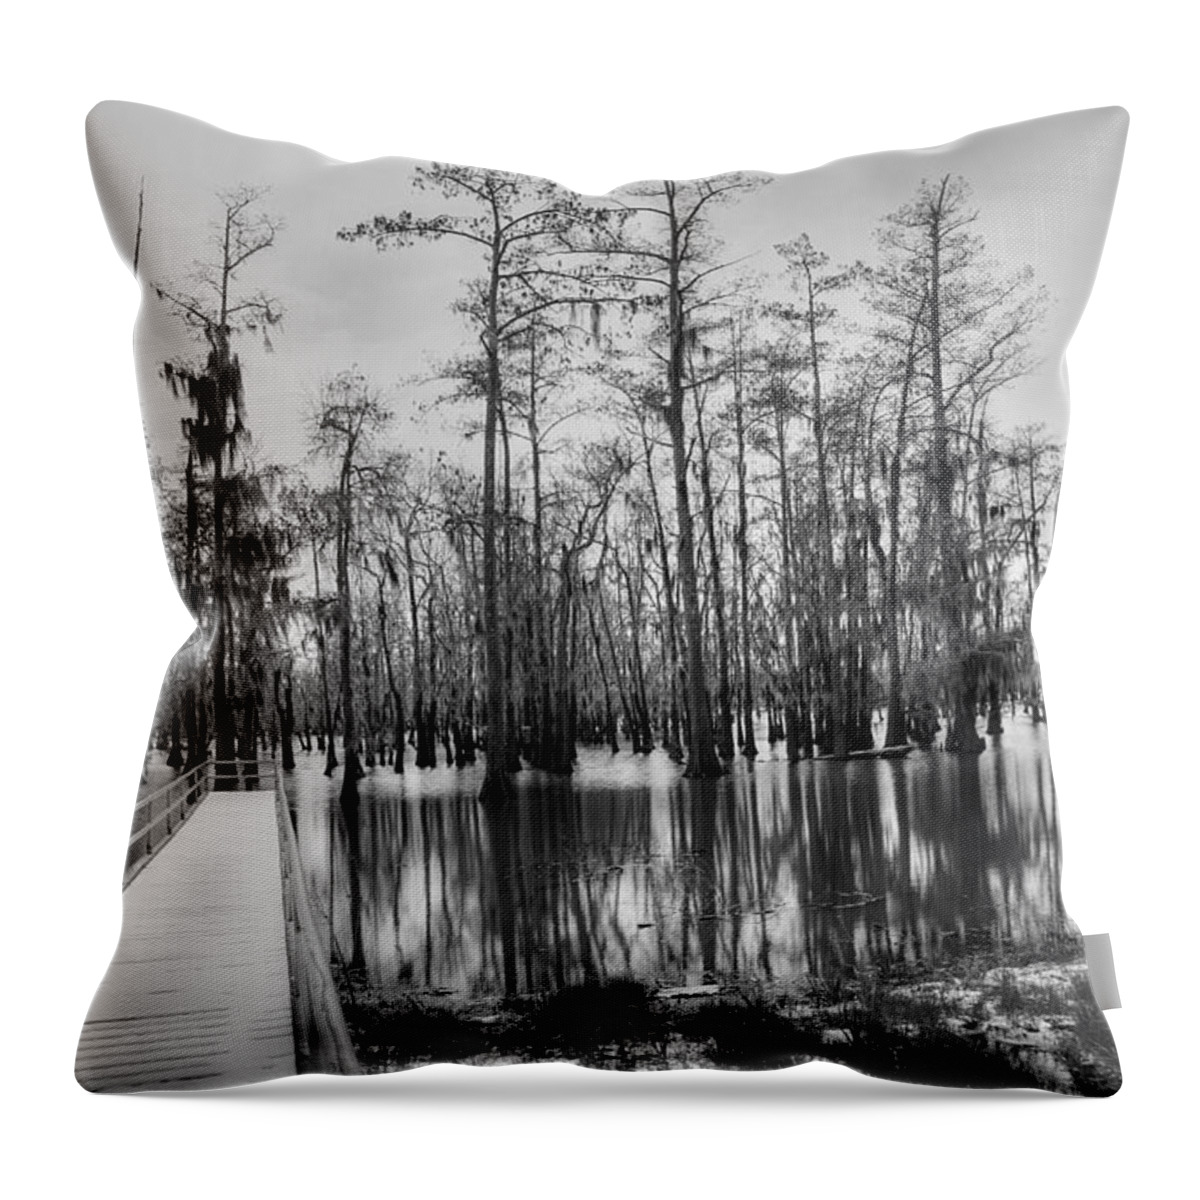 Swamp Throw Pillow featuring the photograph Swamp Dock Black And White by Ester McGuire